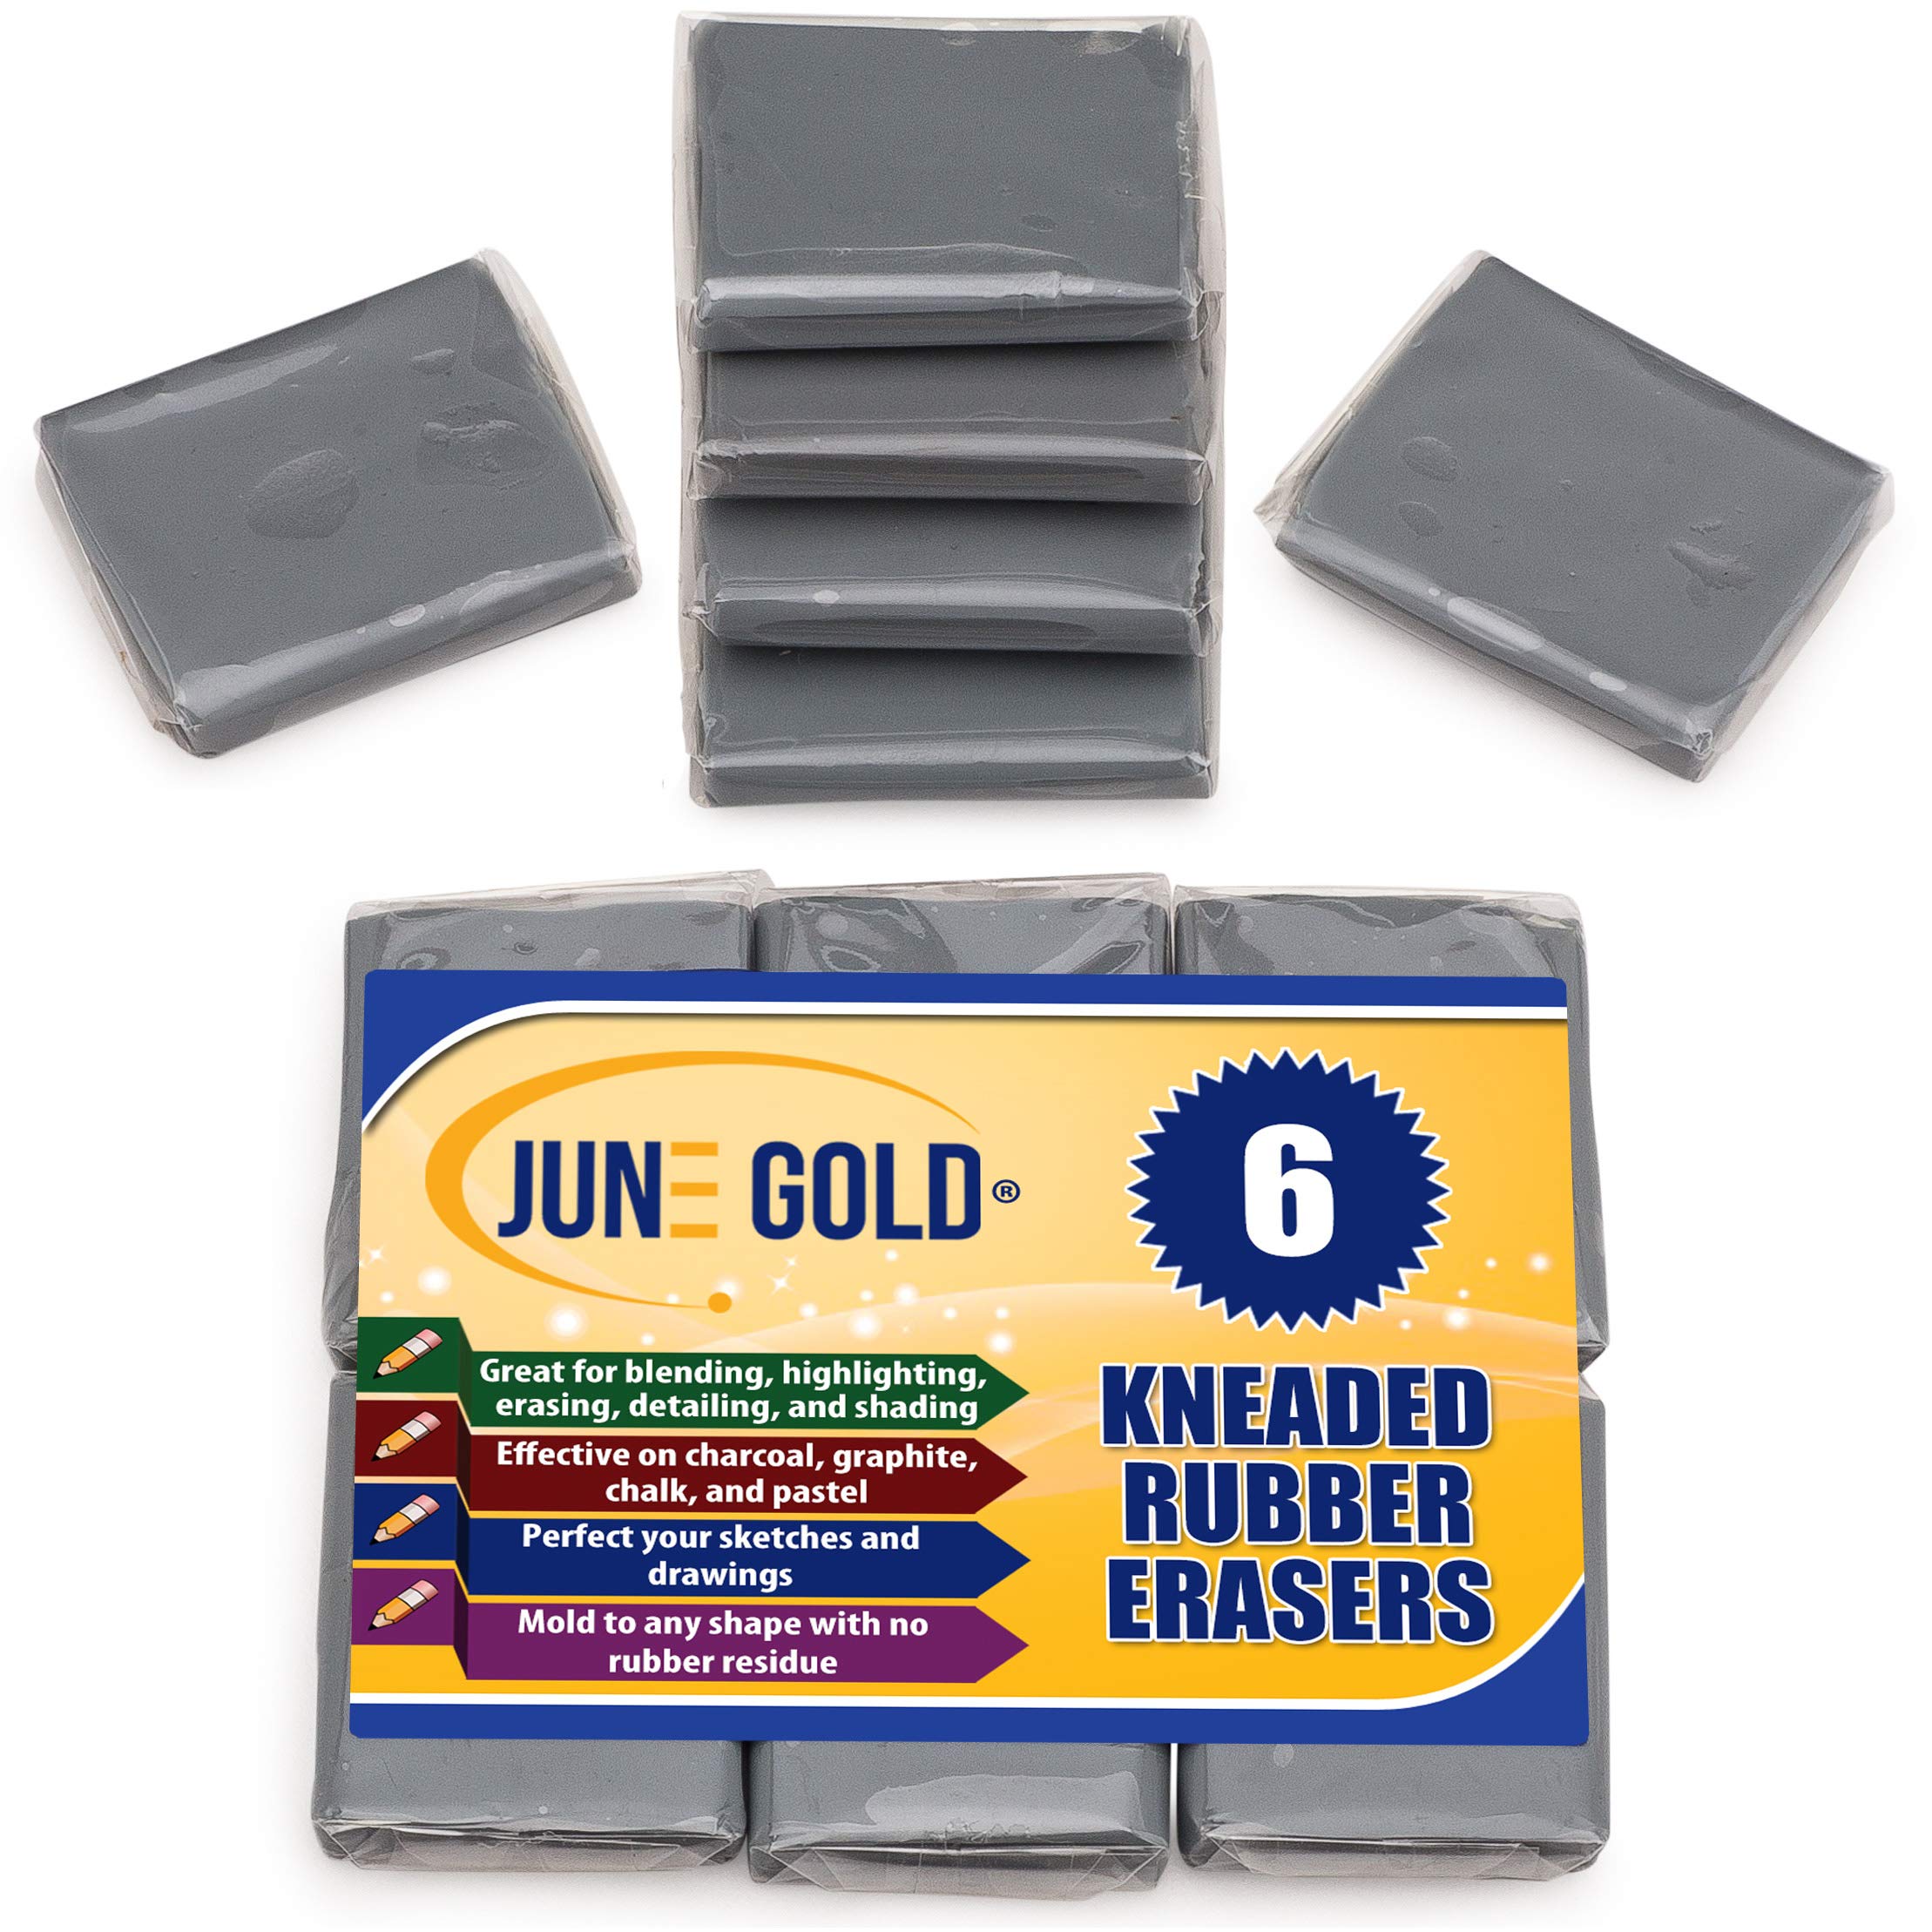 June Gold Kneaded Rubber Erasers Gray 6 Pack - Blend Shade Smooth